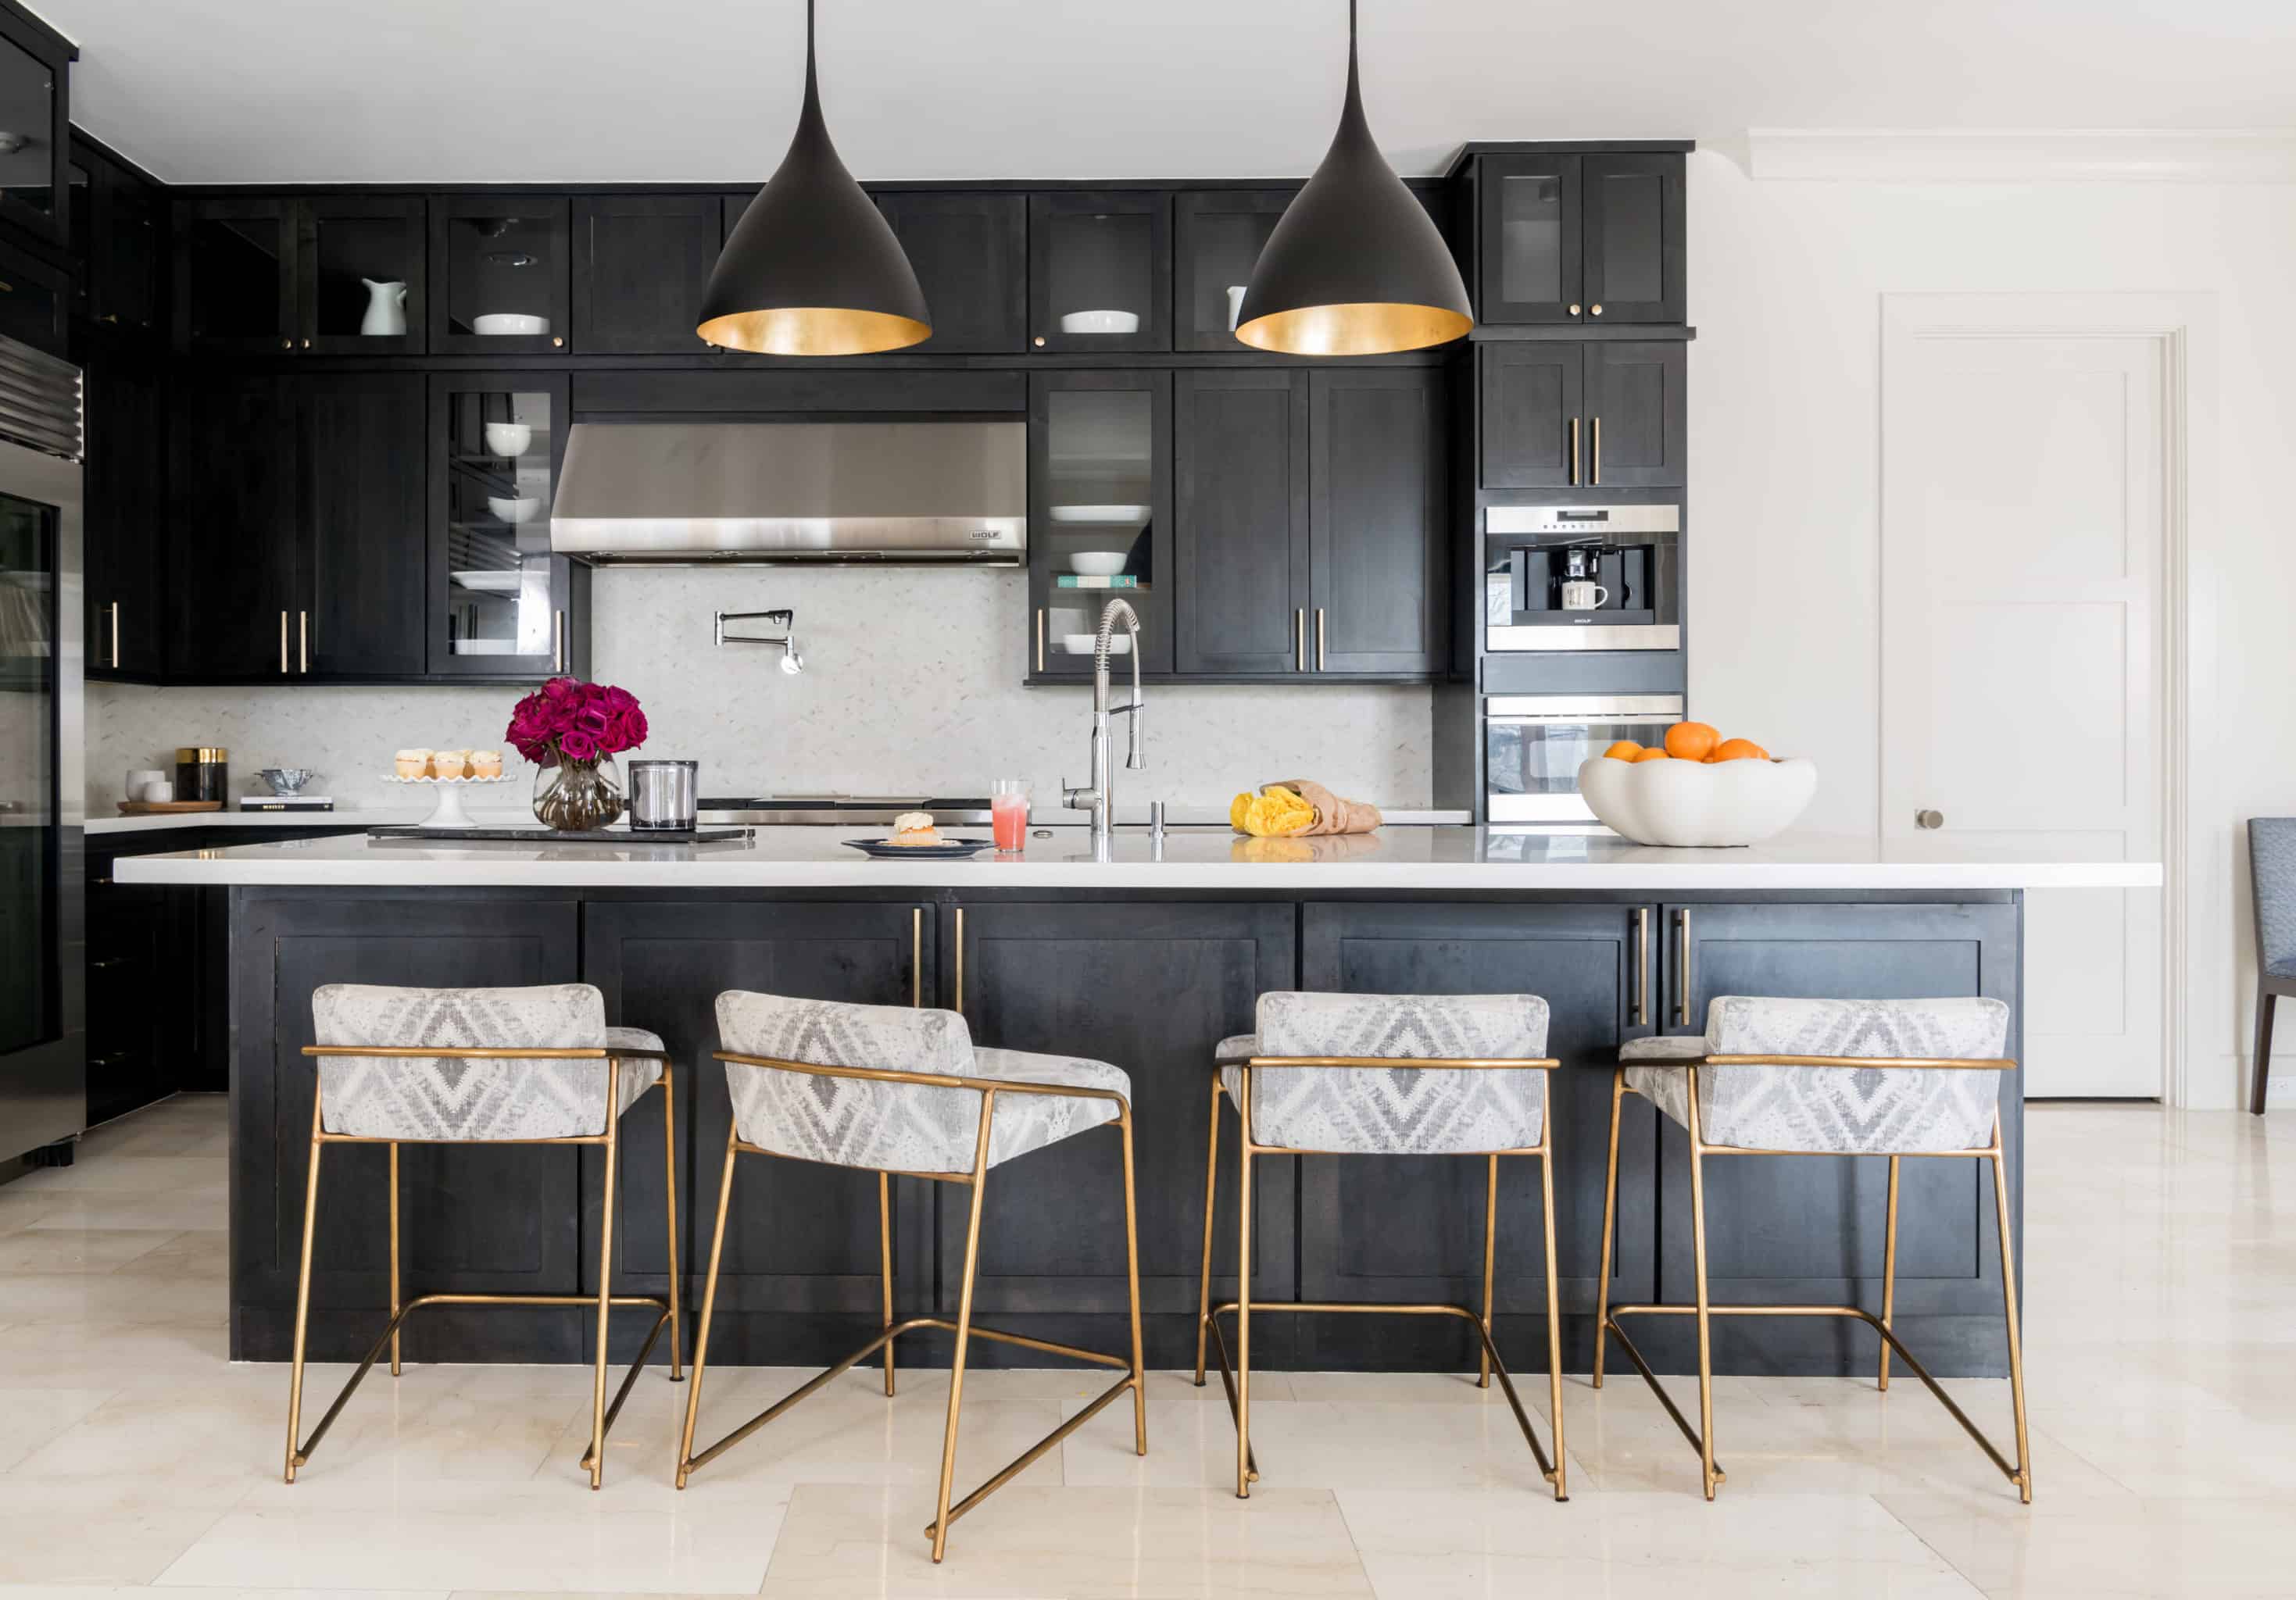 Century Furniture design idea using their Troy Metal Counter Stools in this fabulous kitchen